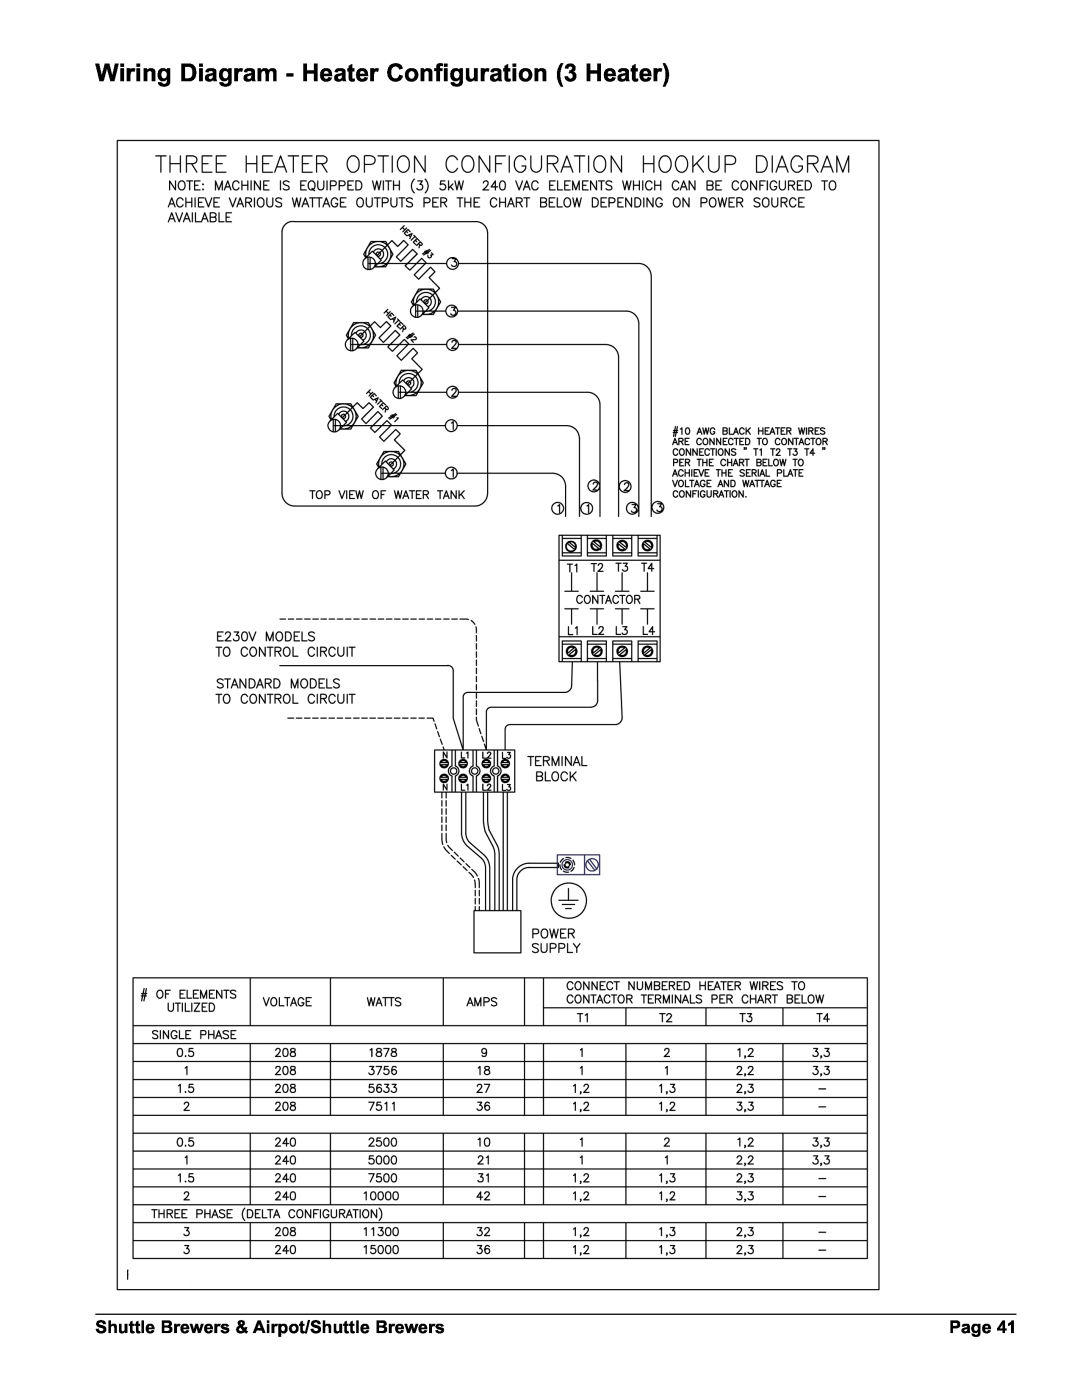 Grindmaster APB-330V2 Wiring Diagram - Heater Configuration 3 Heater, Shuttle Brewers & Airpot/Shuttle Brewers, Page 